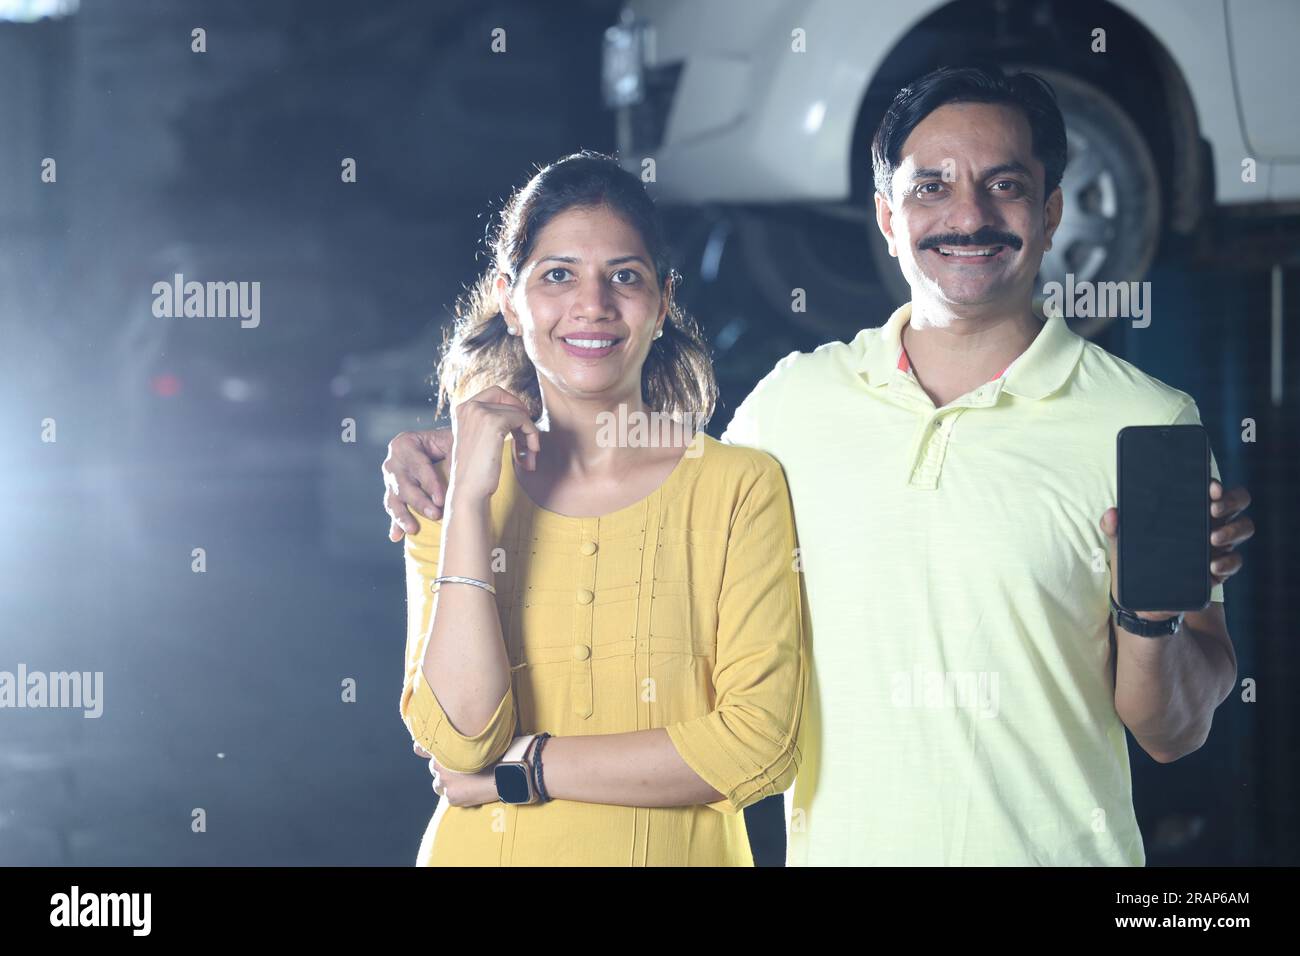 Indian happy customers showing thumbs up for repairing the car with honesty. Portraying customer trust and satisfaction towards the service station Stock Photo